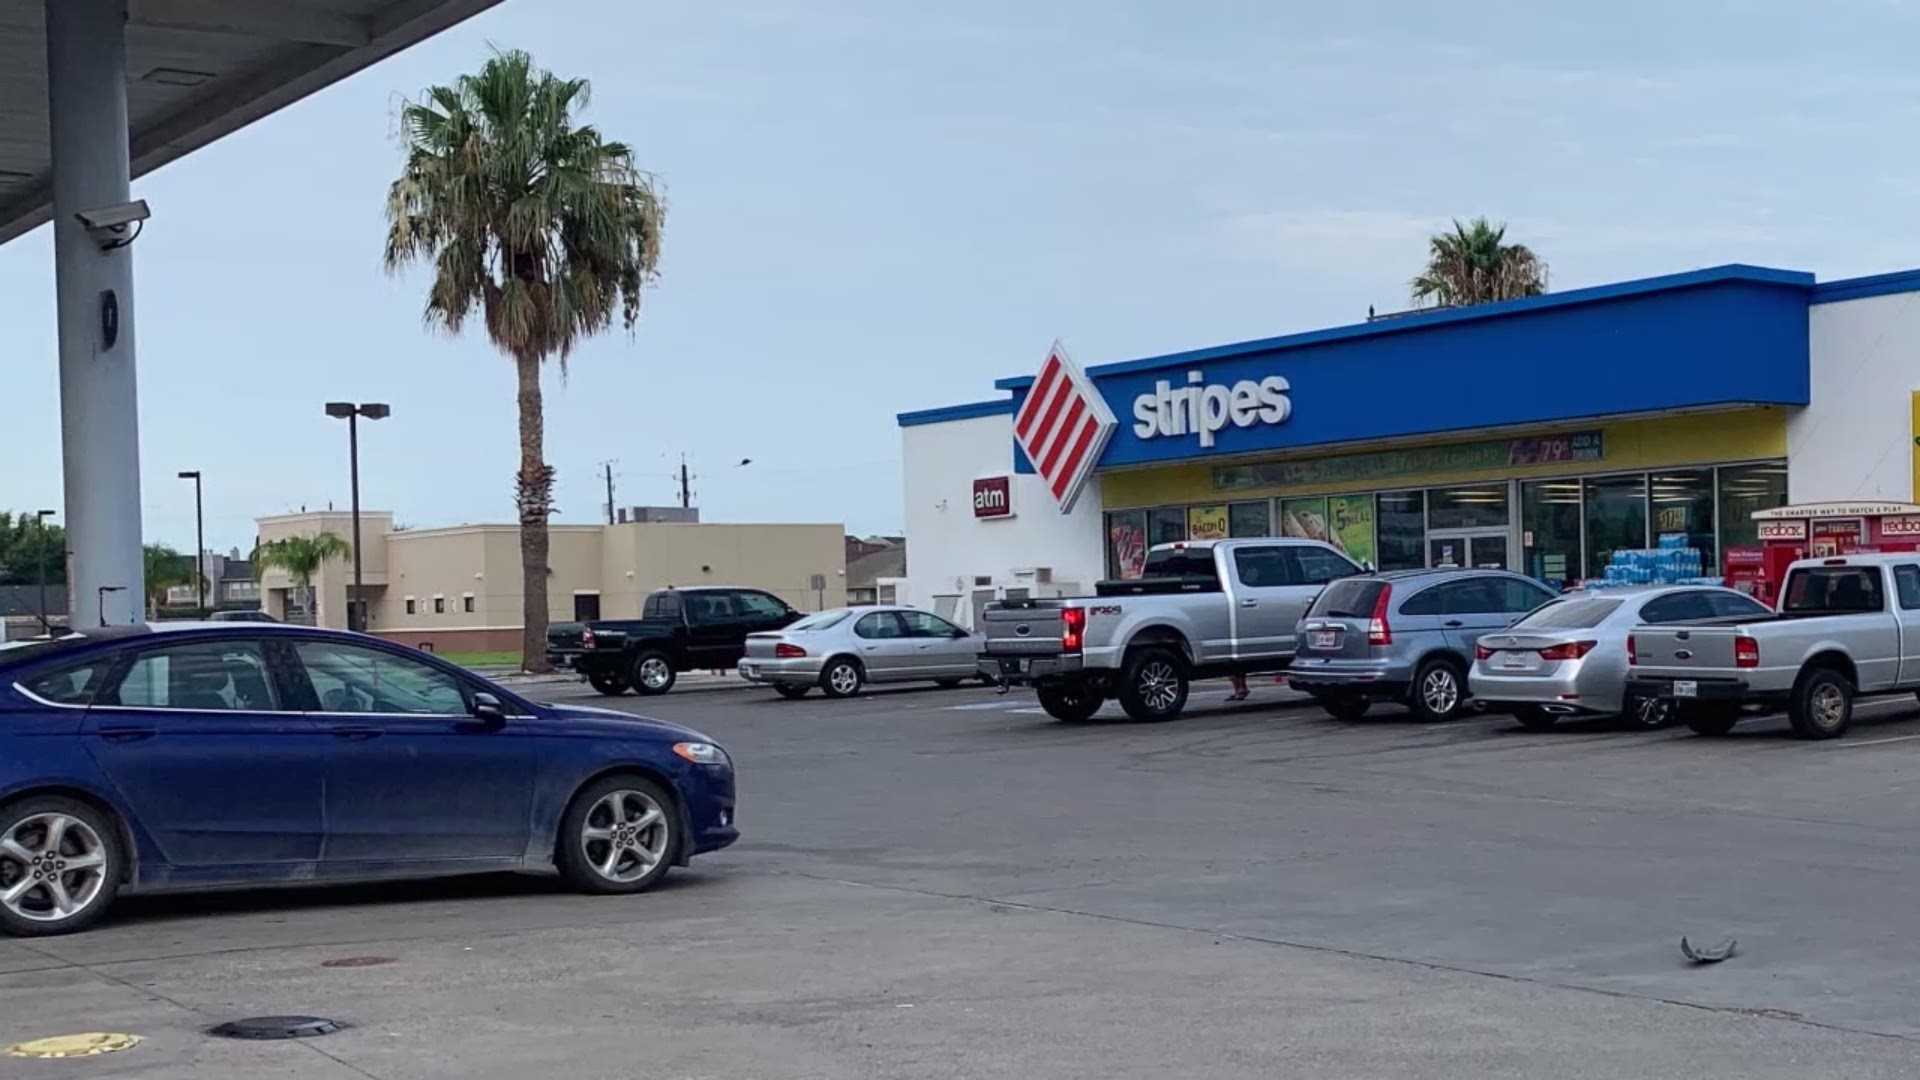 The teens were caught shoplifting at the Stripes store on Everhart Road and Snowgoose.